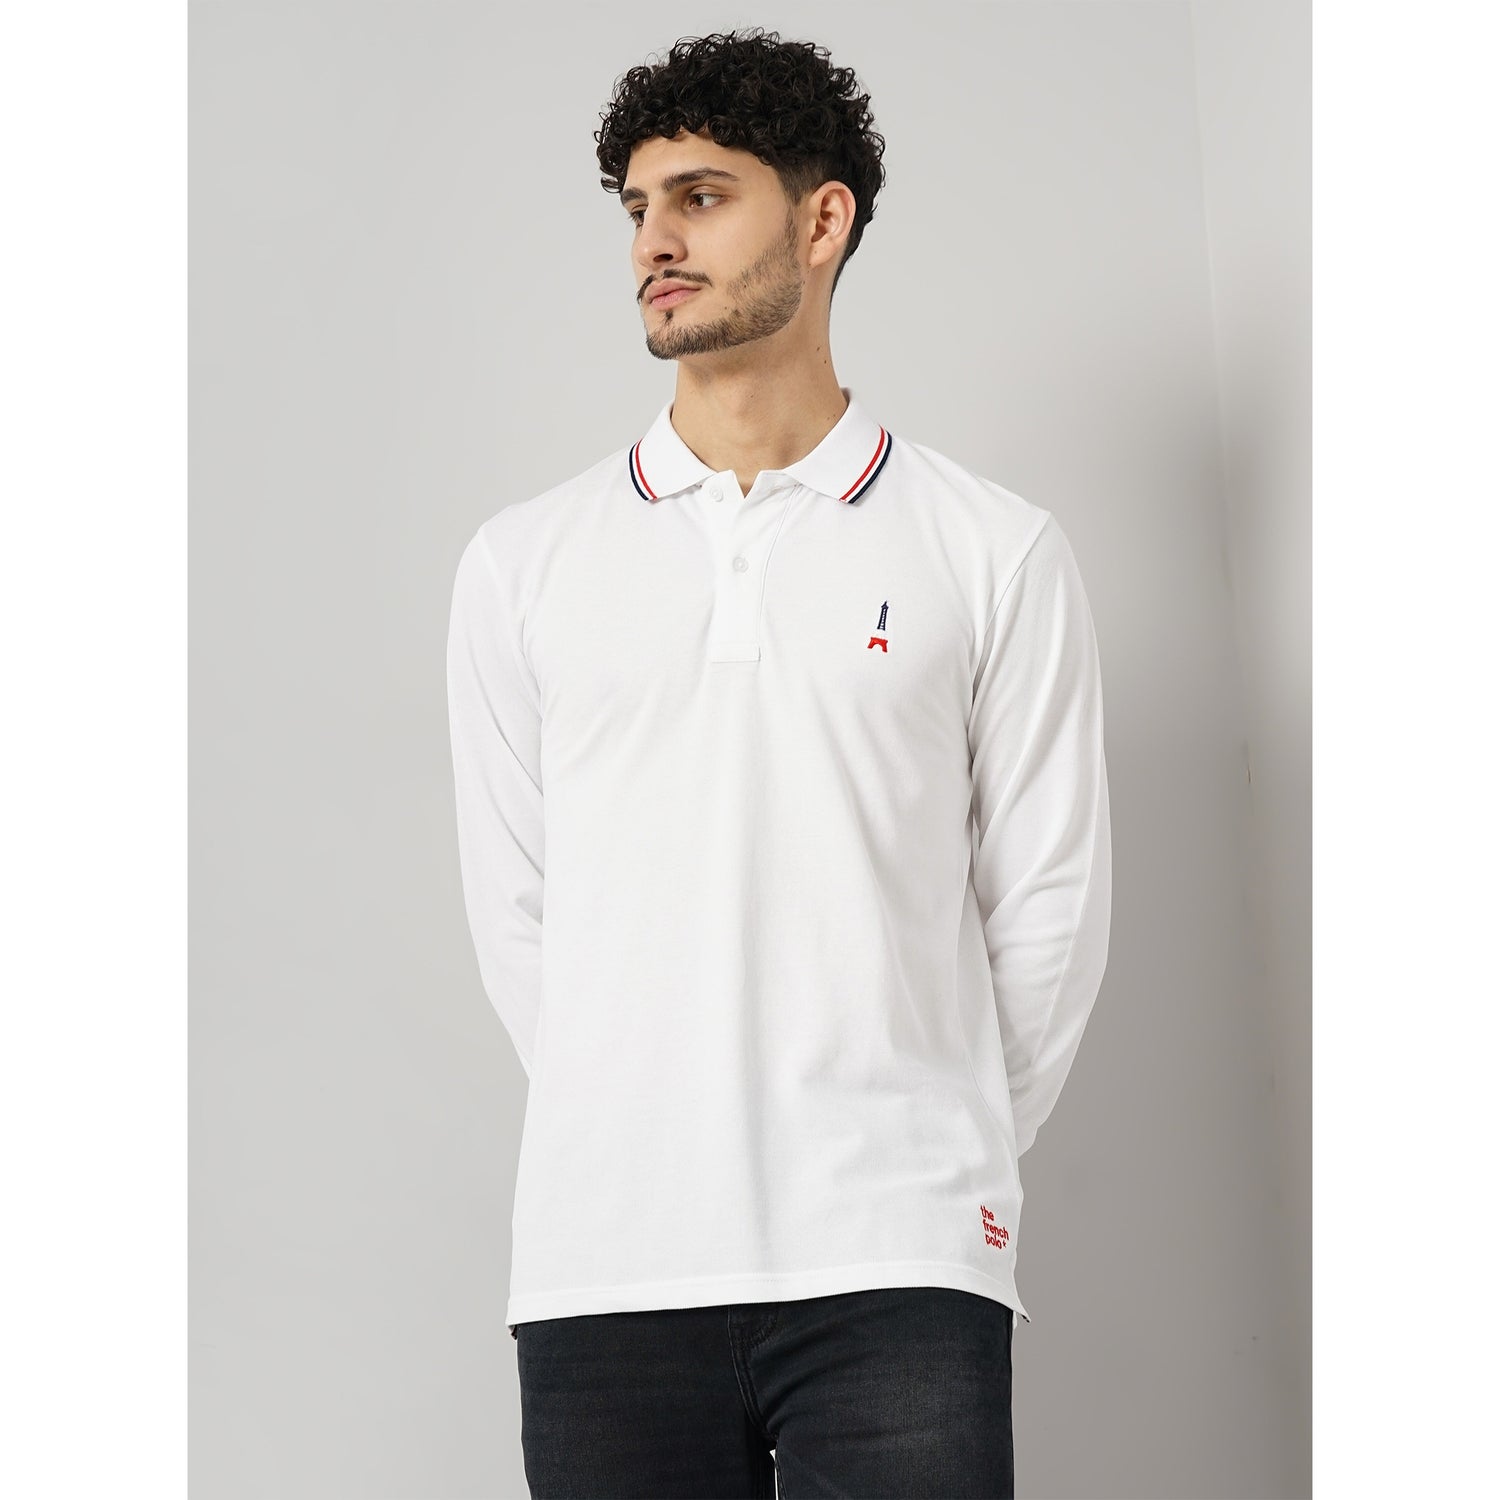 Solid White Full Polo Collar French Polo Tshirt (FEFRANCEML)